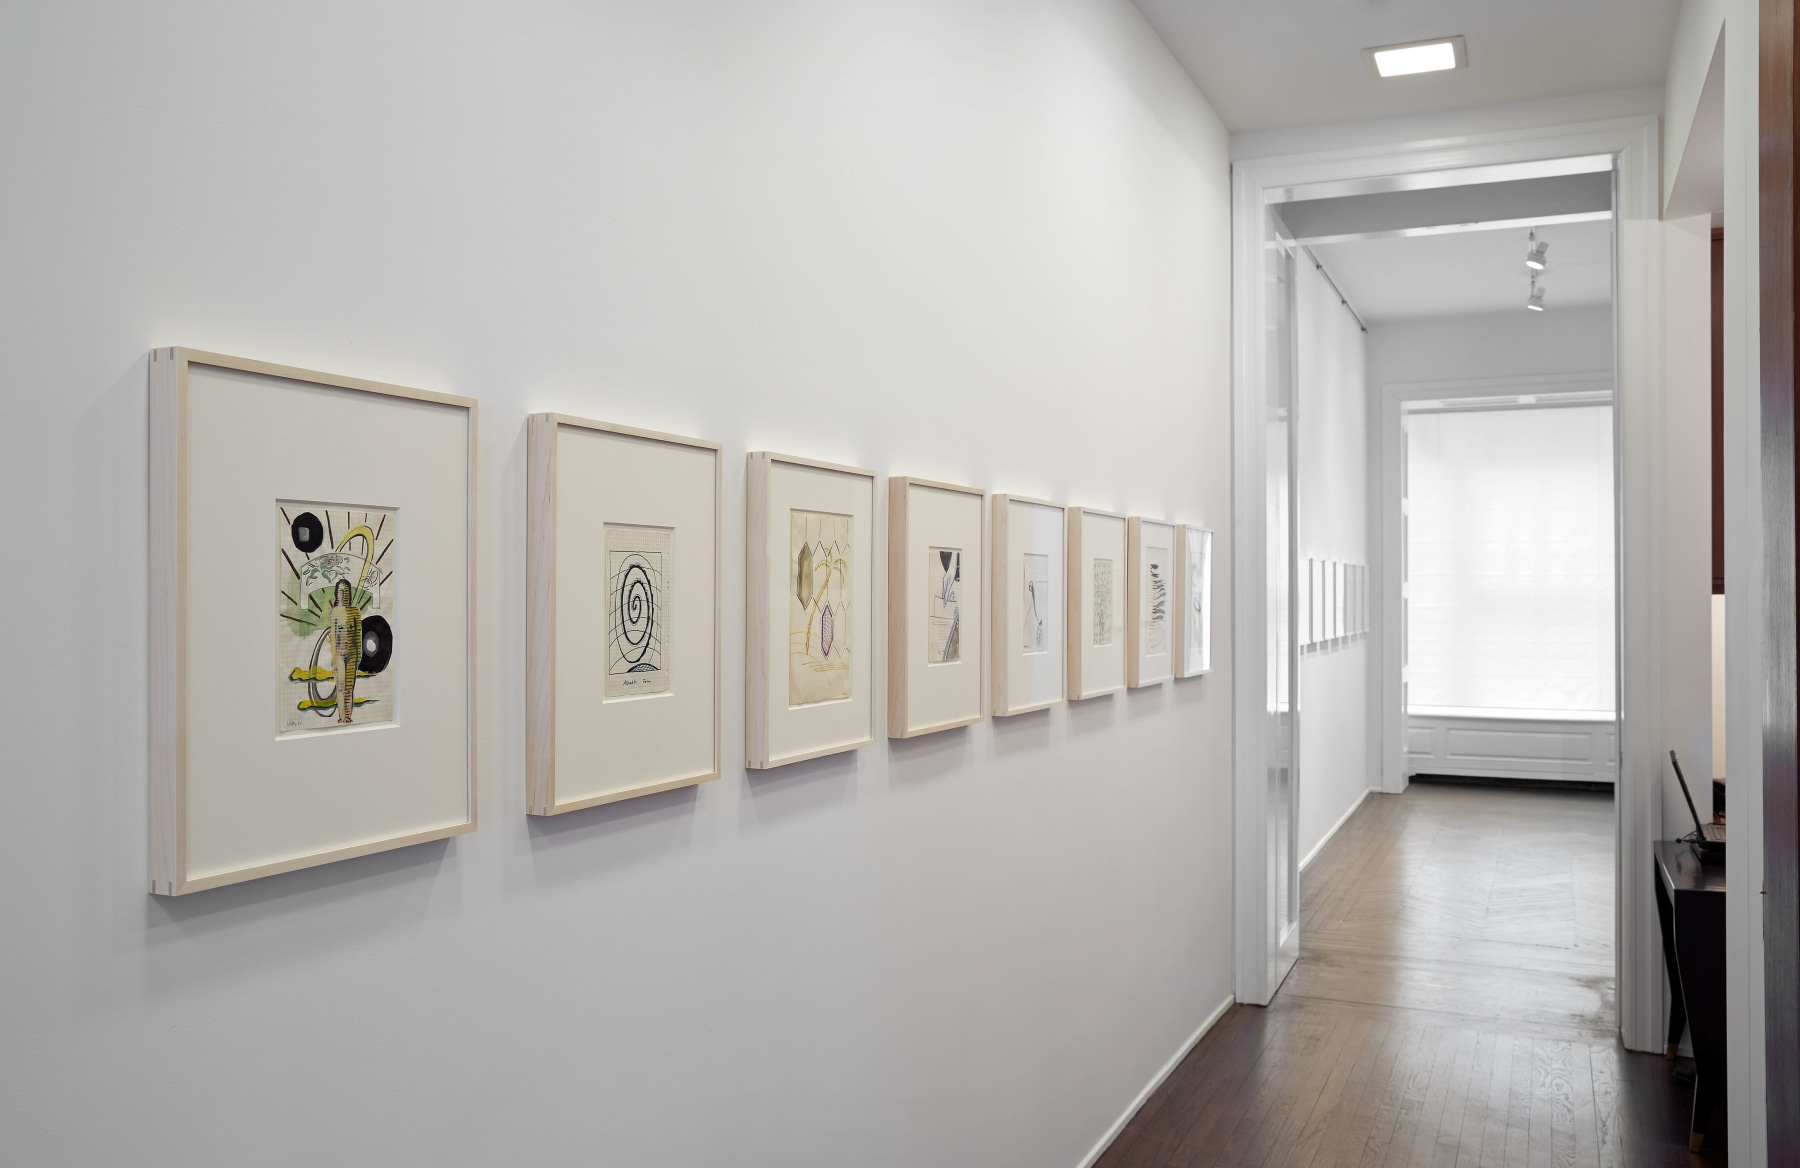 Sigmar Polke, Early Works on Paper, New York, 2014, Installation Image 11